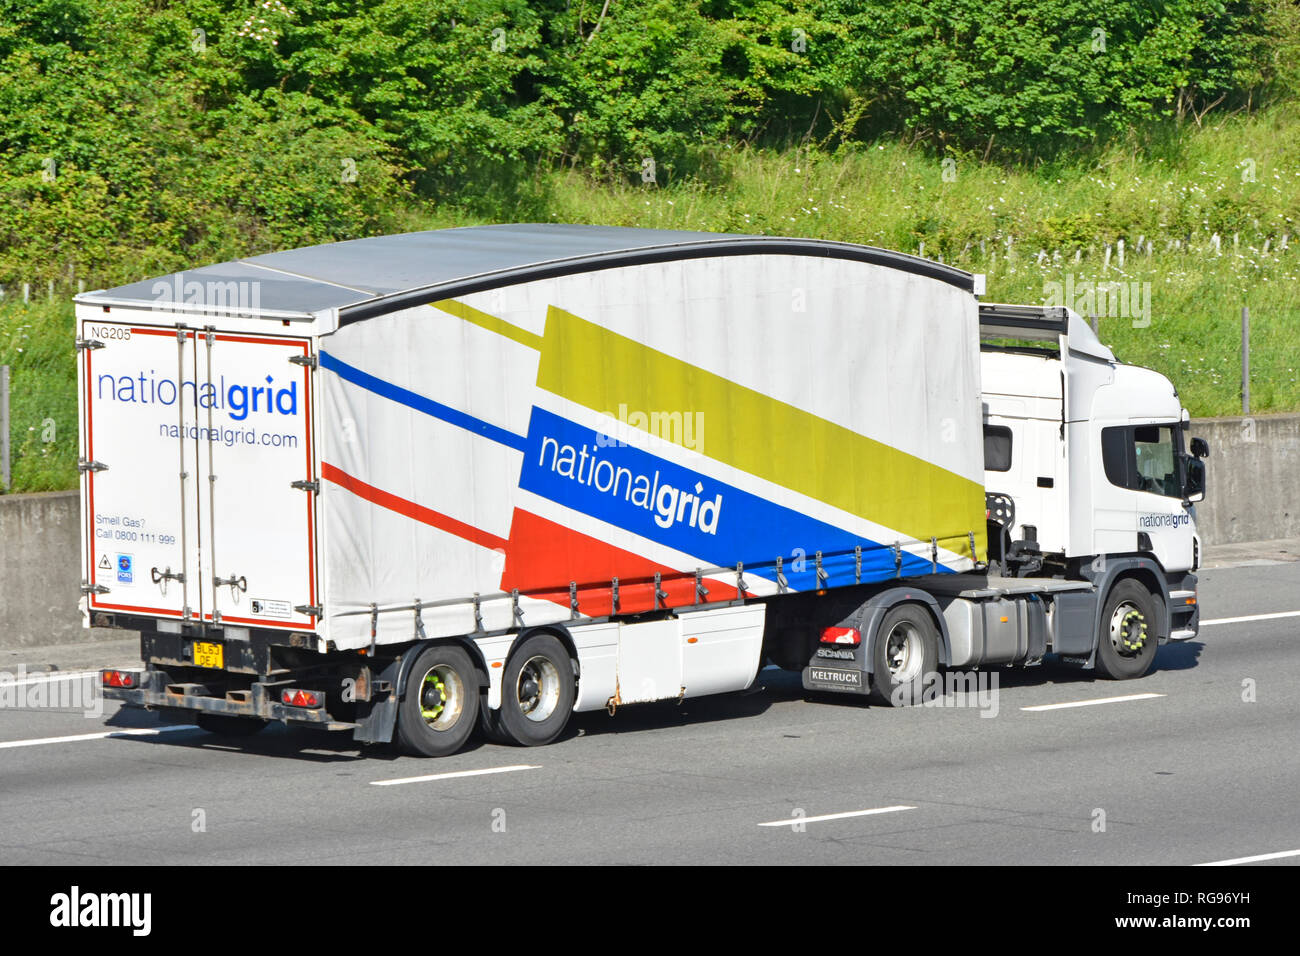 Side & back view of National Grid hgv lorry truck & colourful graphics on side of aerodynamics shaped articulated trailer on motorway Essex England UK Stock Photo